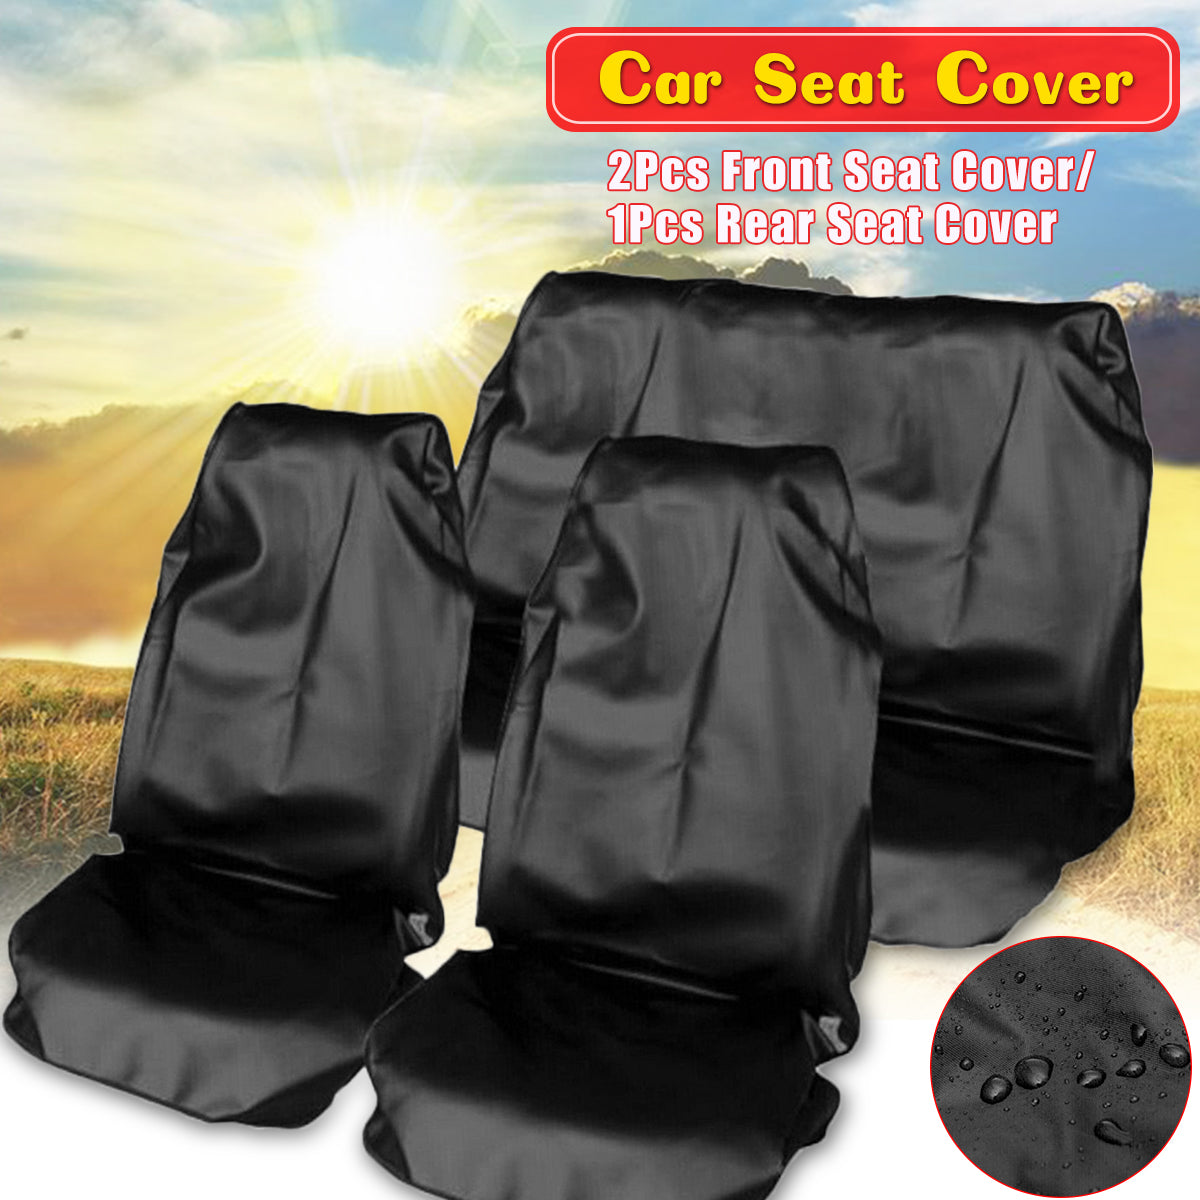 Dim Gray Universal Car Front Rear Seat Cover Anti Dust Waterproof Vehicle Protector (Set)